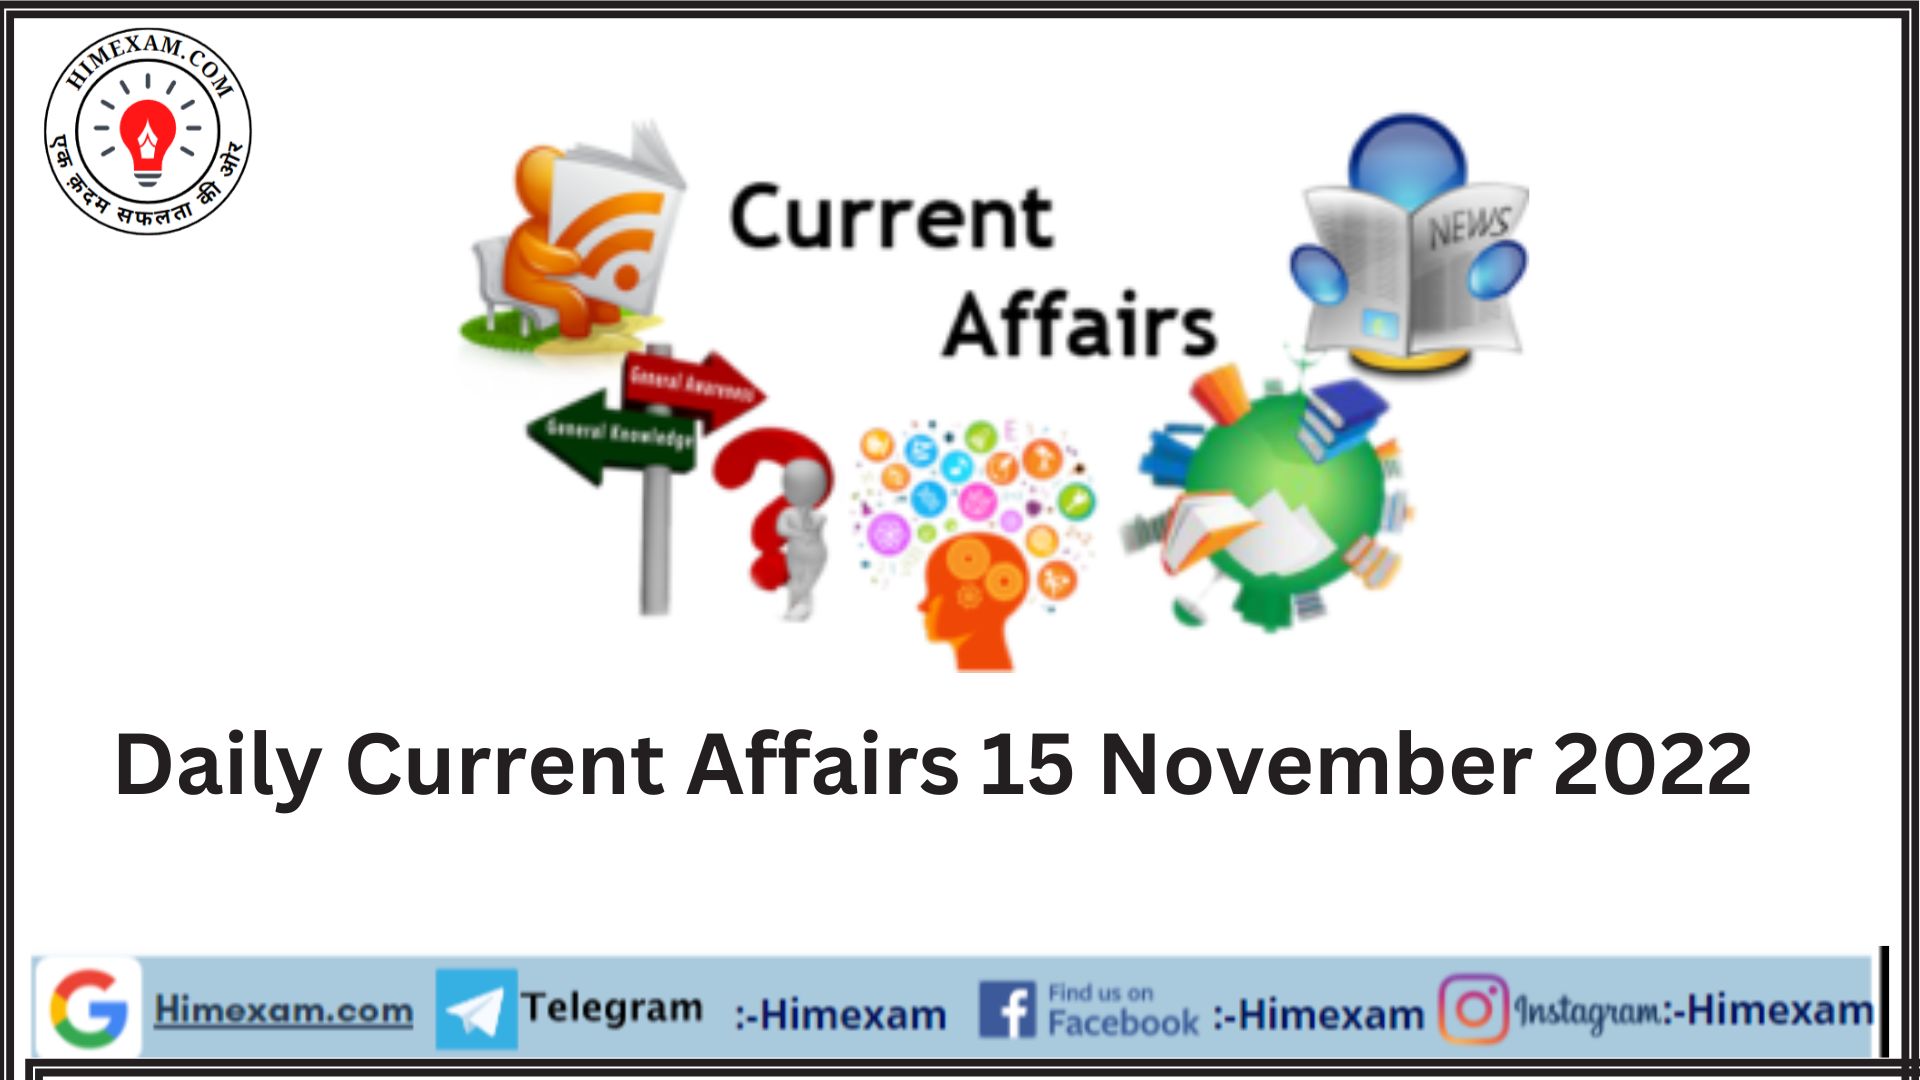 Daily Current Affairs 15 November 2022